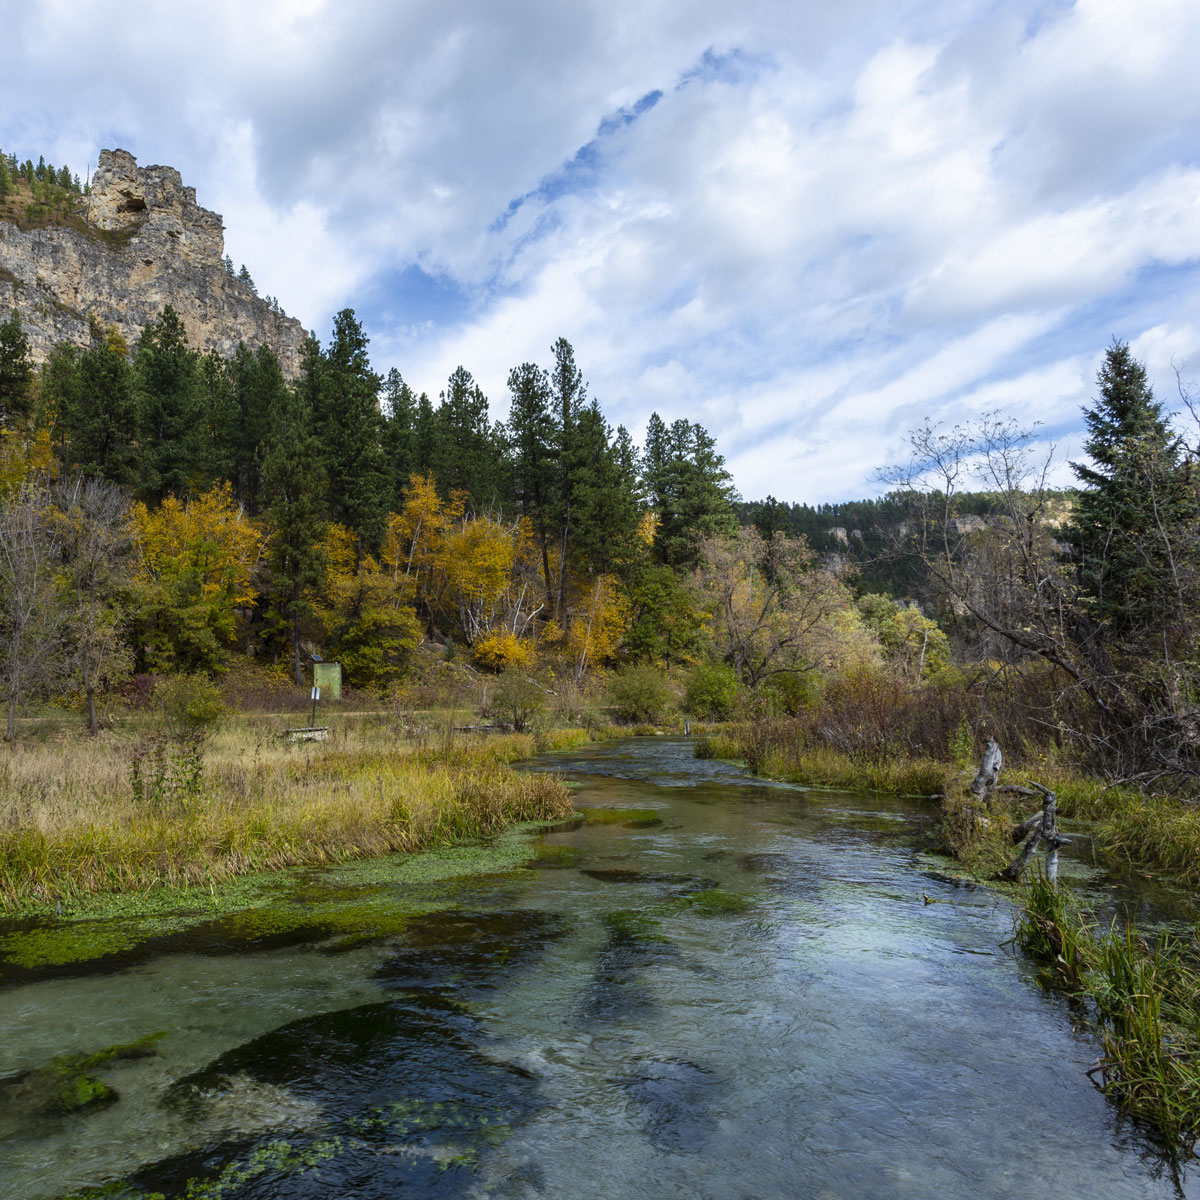 The clear waters o Spearfish Creek surrounded by yellow and green trees flow through Spearfish Canyon bubbling over rocks along the way.